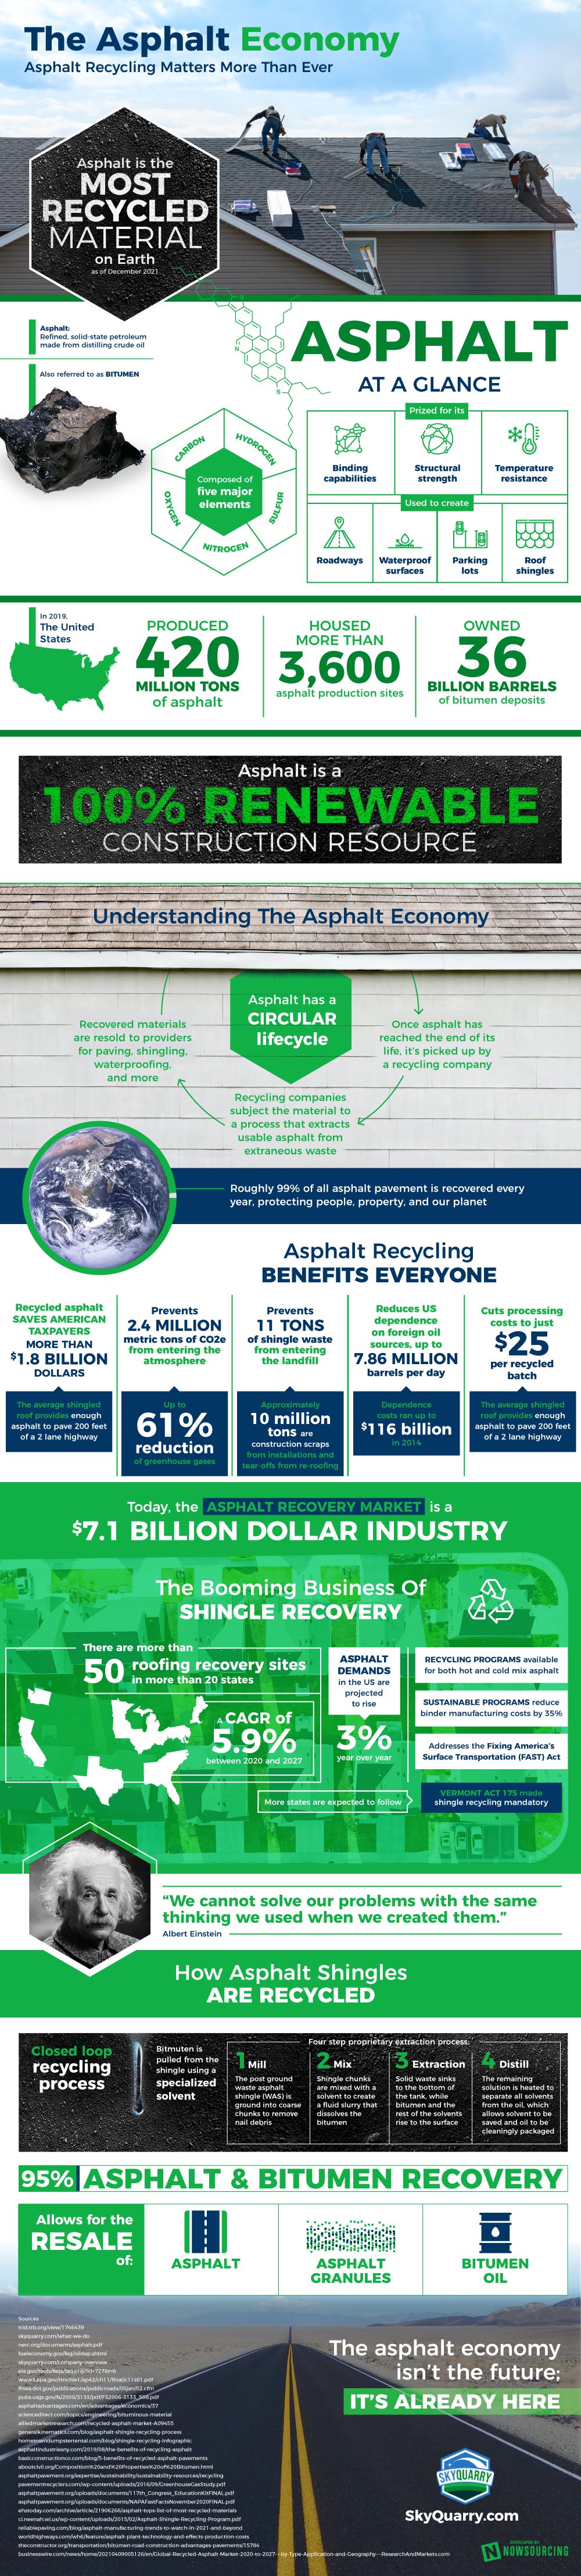 The Asphalt Economy: Recycling Matters More Than Ever